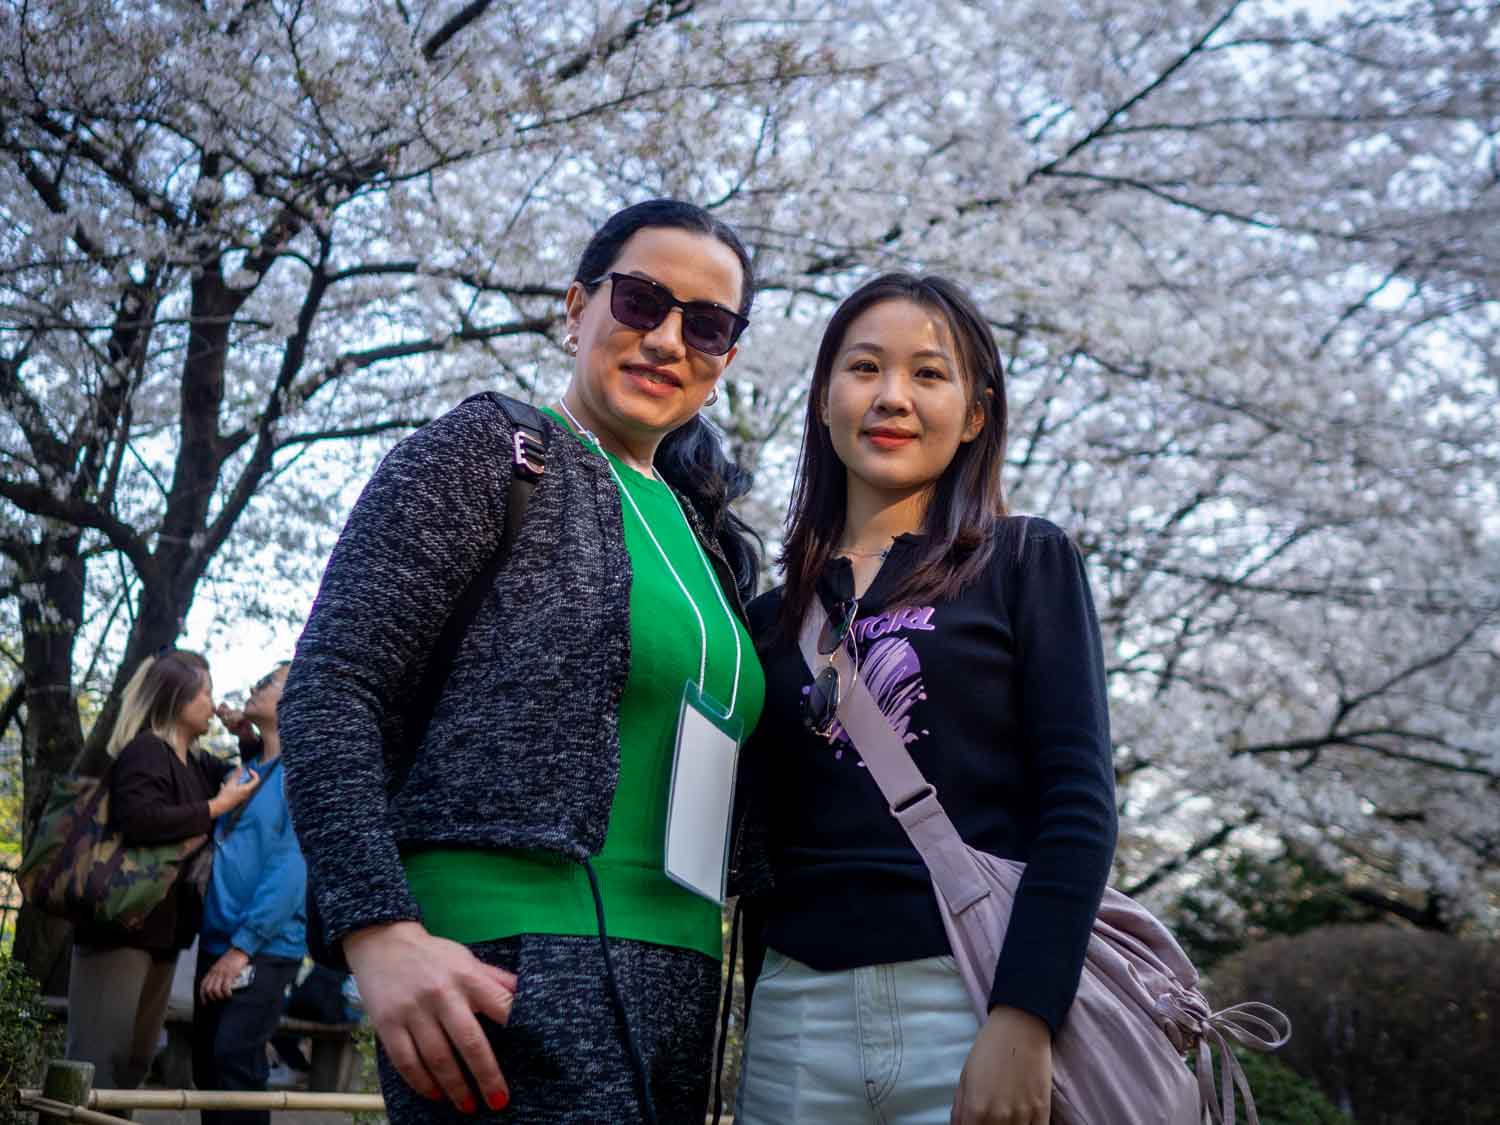 Cherry Blossom Viewing Side Event